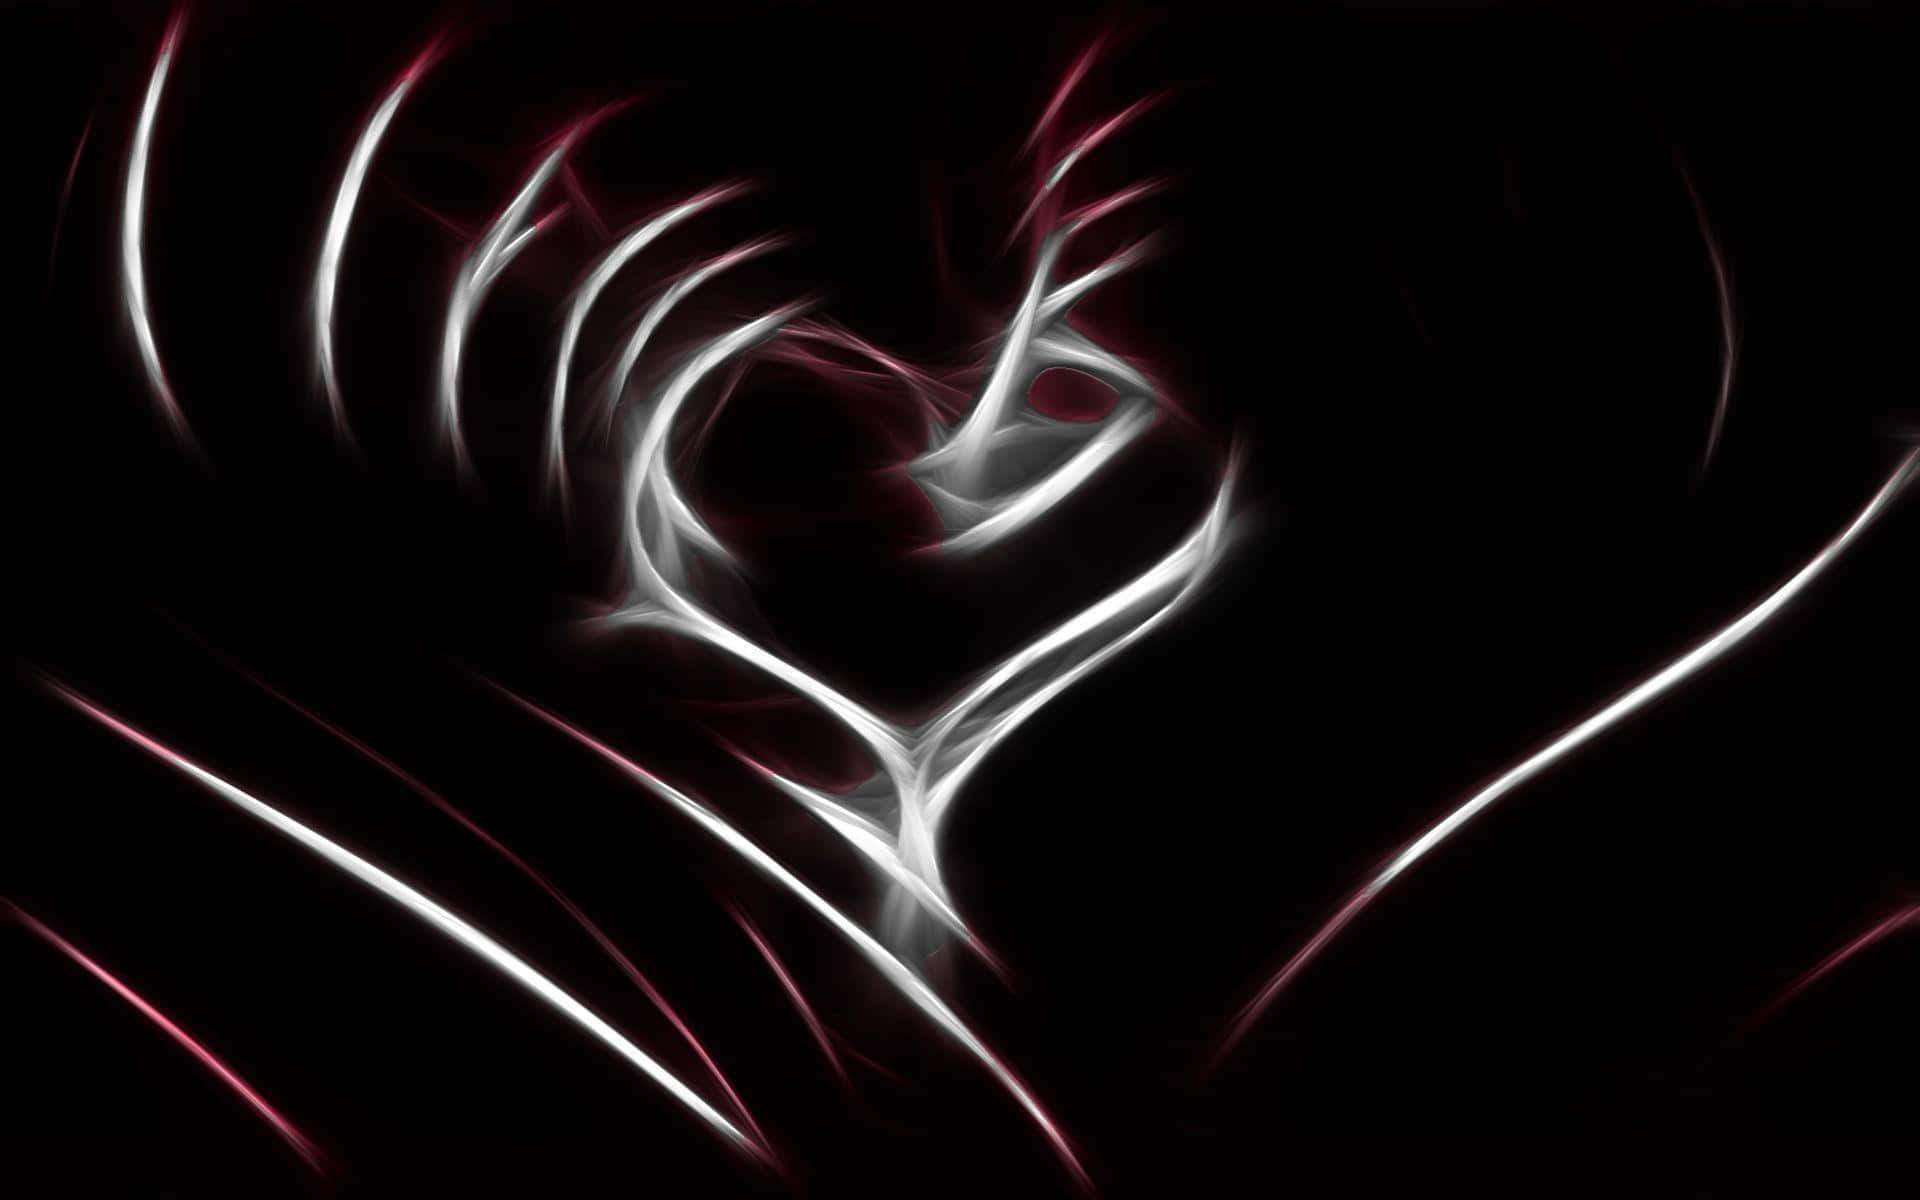 a black and white abstract image of a heart